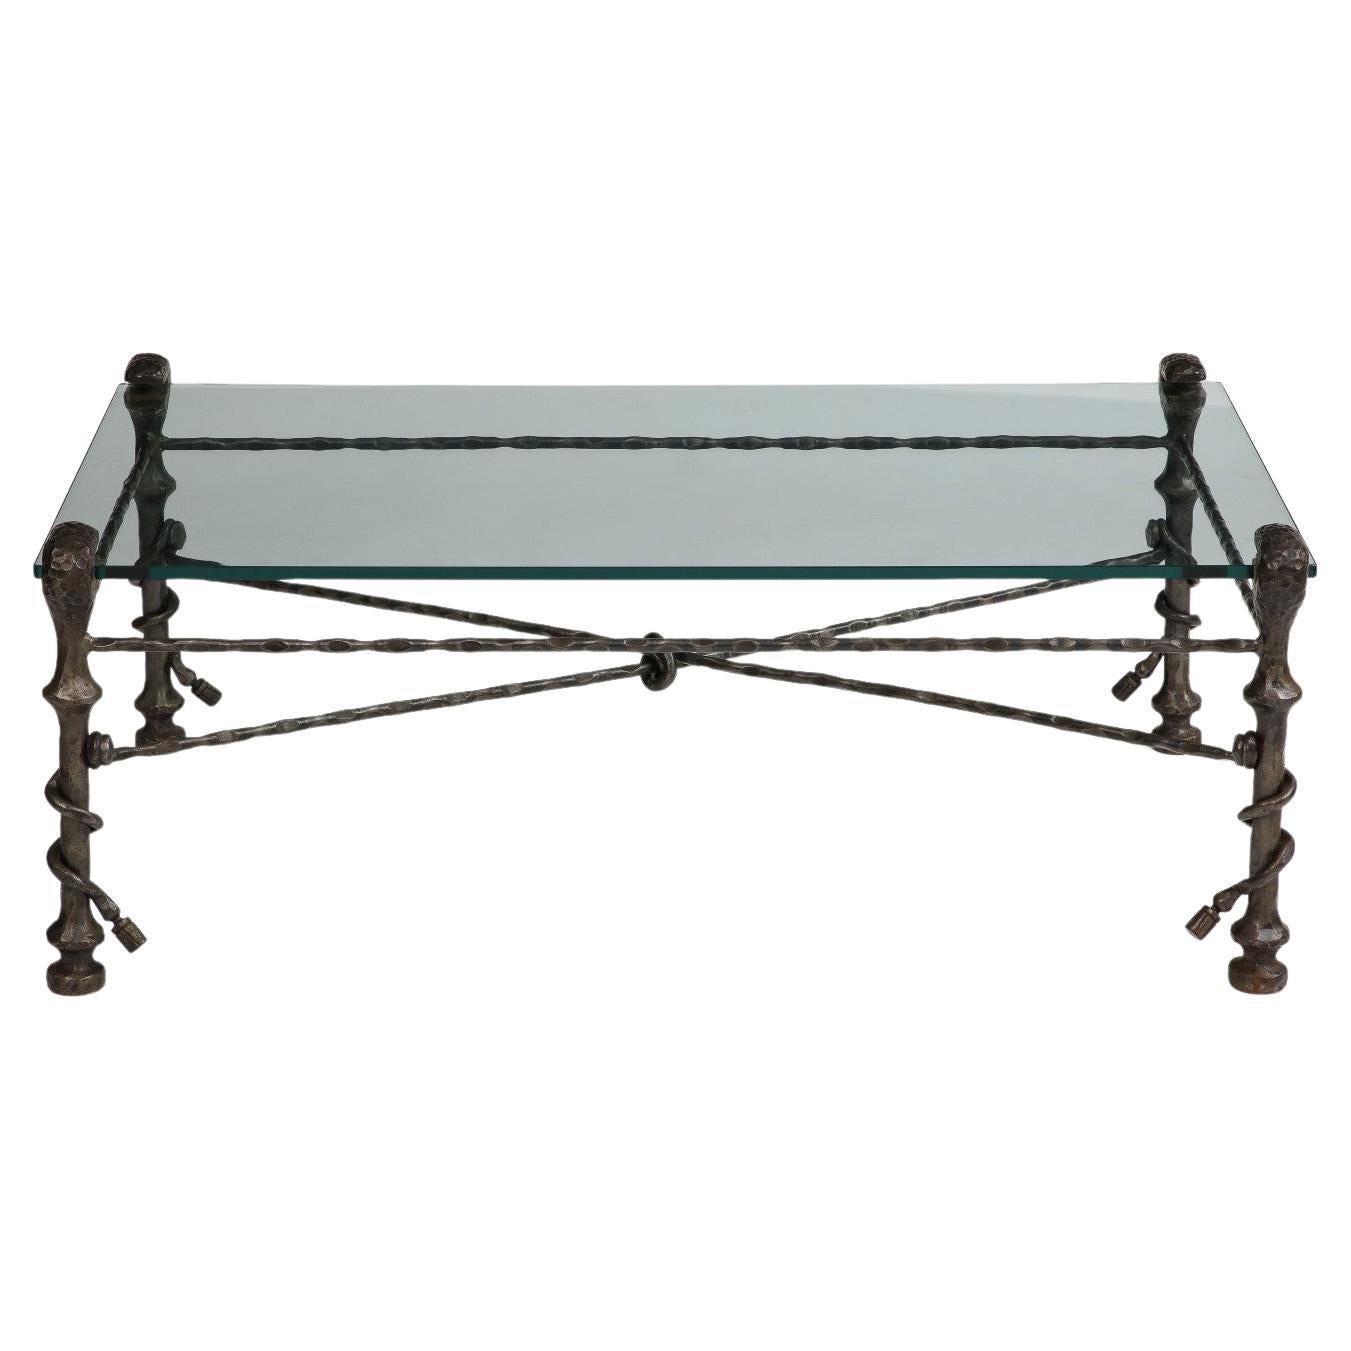 Midcentury Italian Giacometti-Style Bronze Coffee Table with Glass Top, c. 1950